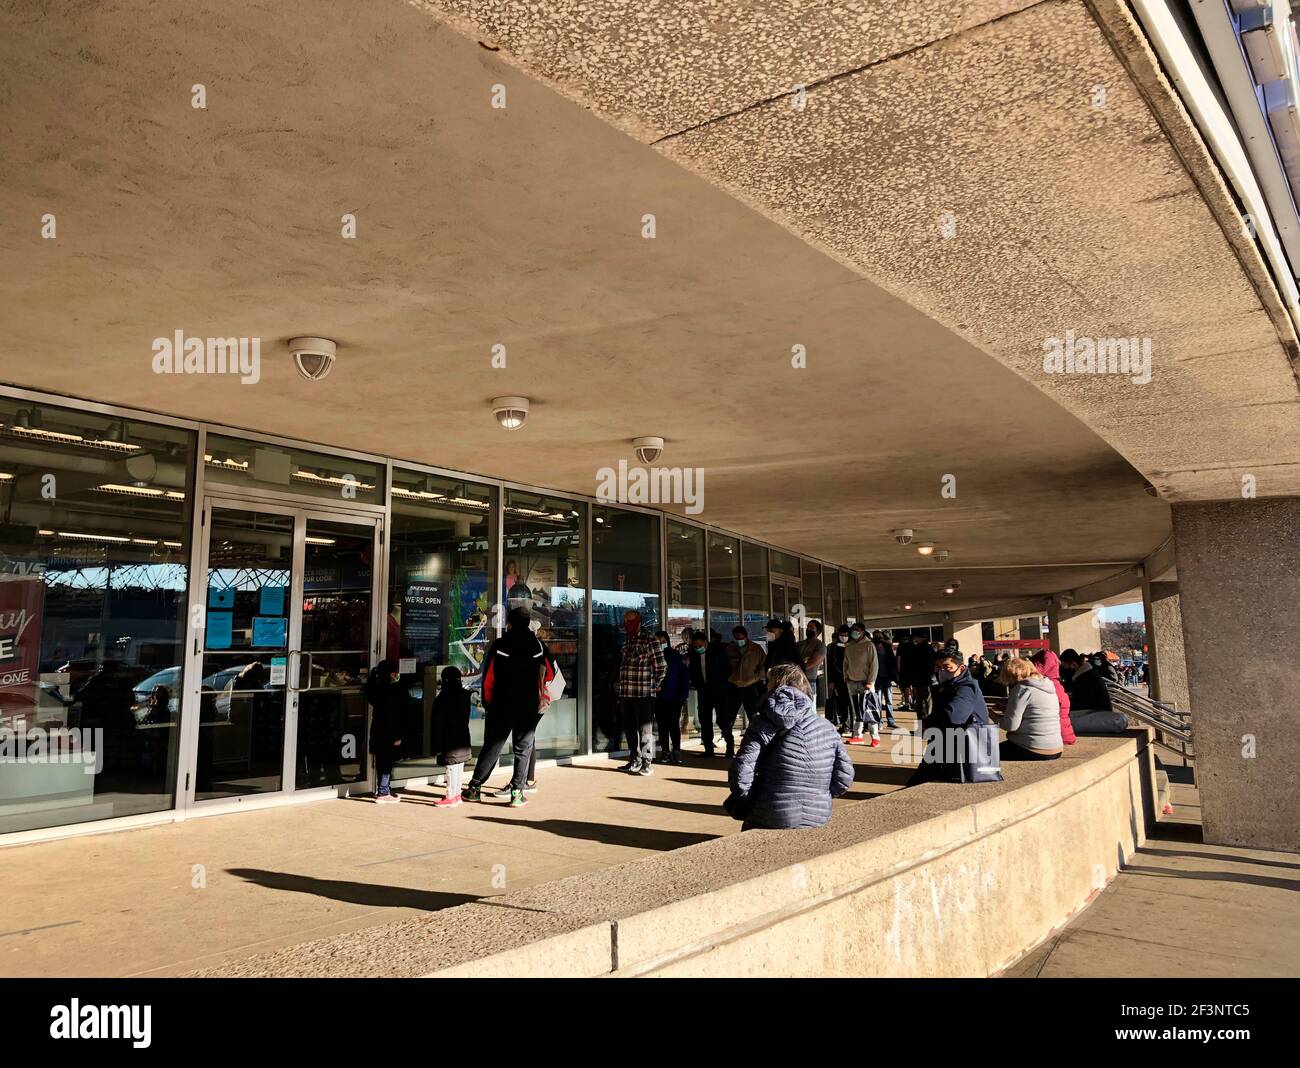 Long line outside Skechers Shoe Store during Pandemic on Black Friday, Rego  Park Mall, Queens, NY Stock Photo - Alamy